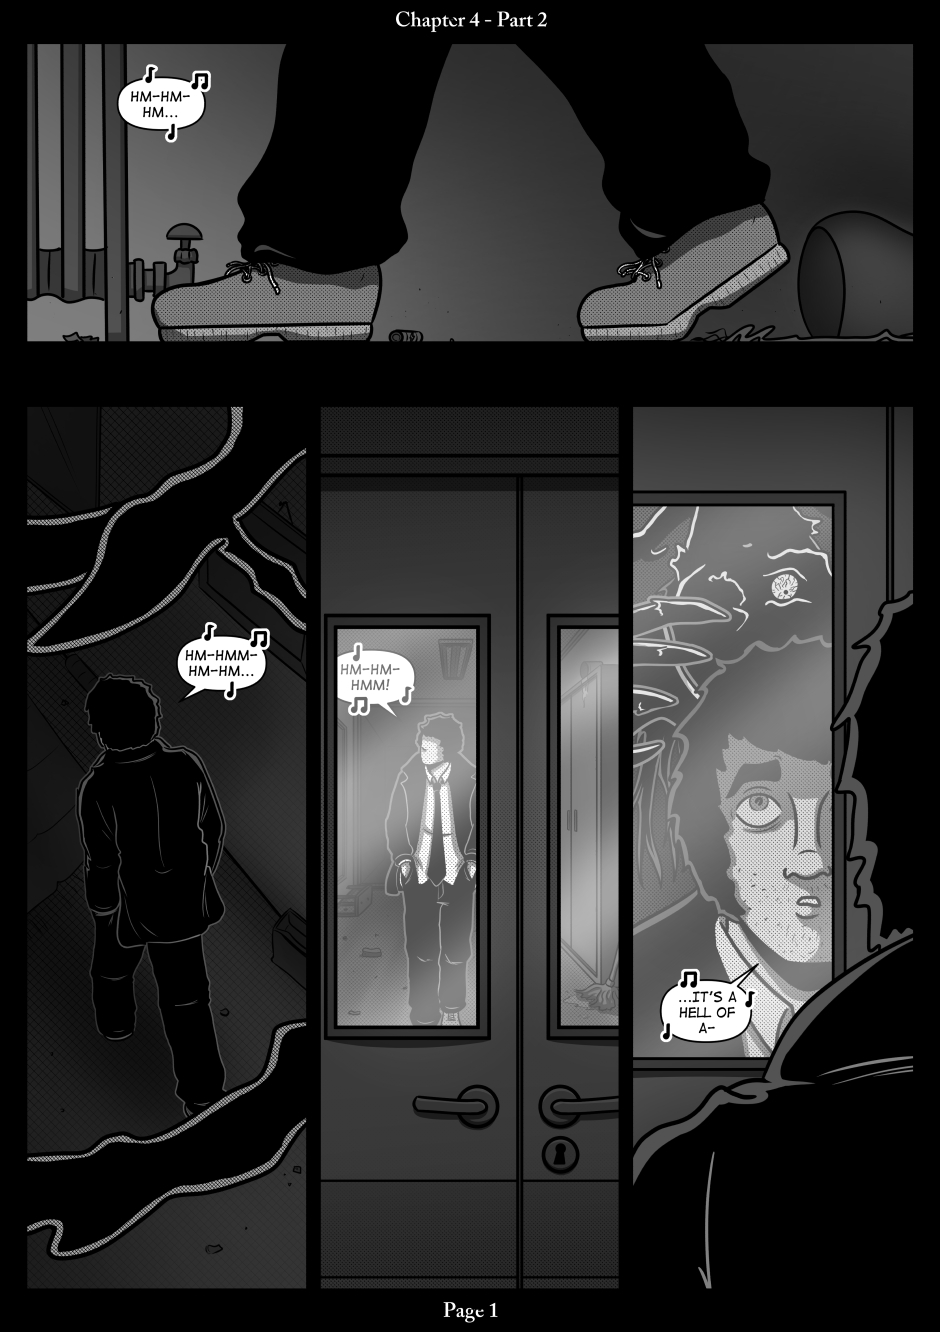 Chapter 4, Part 2 - Page 1